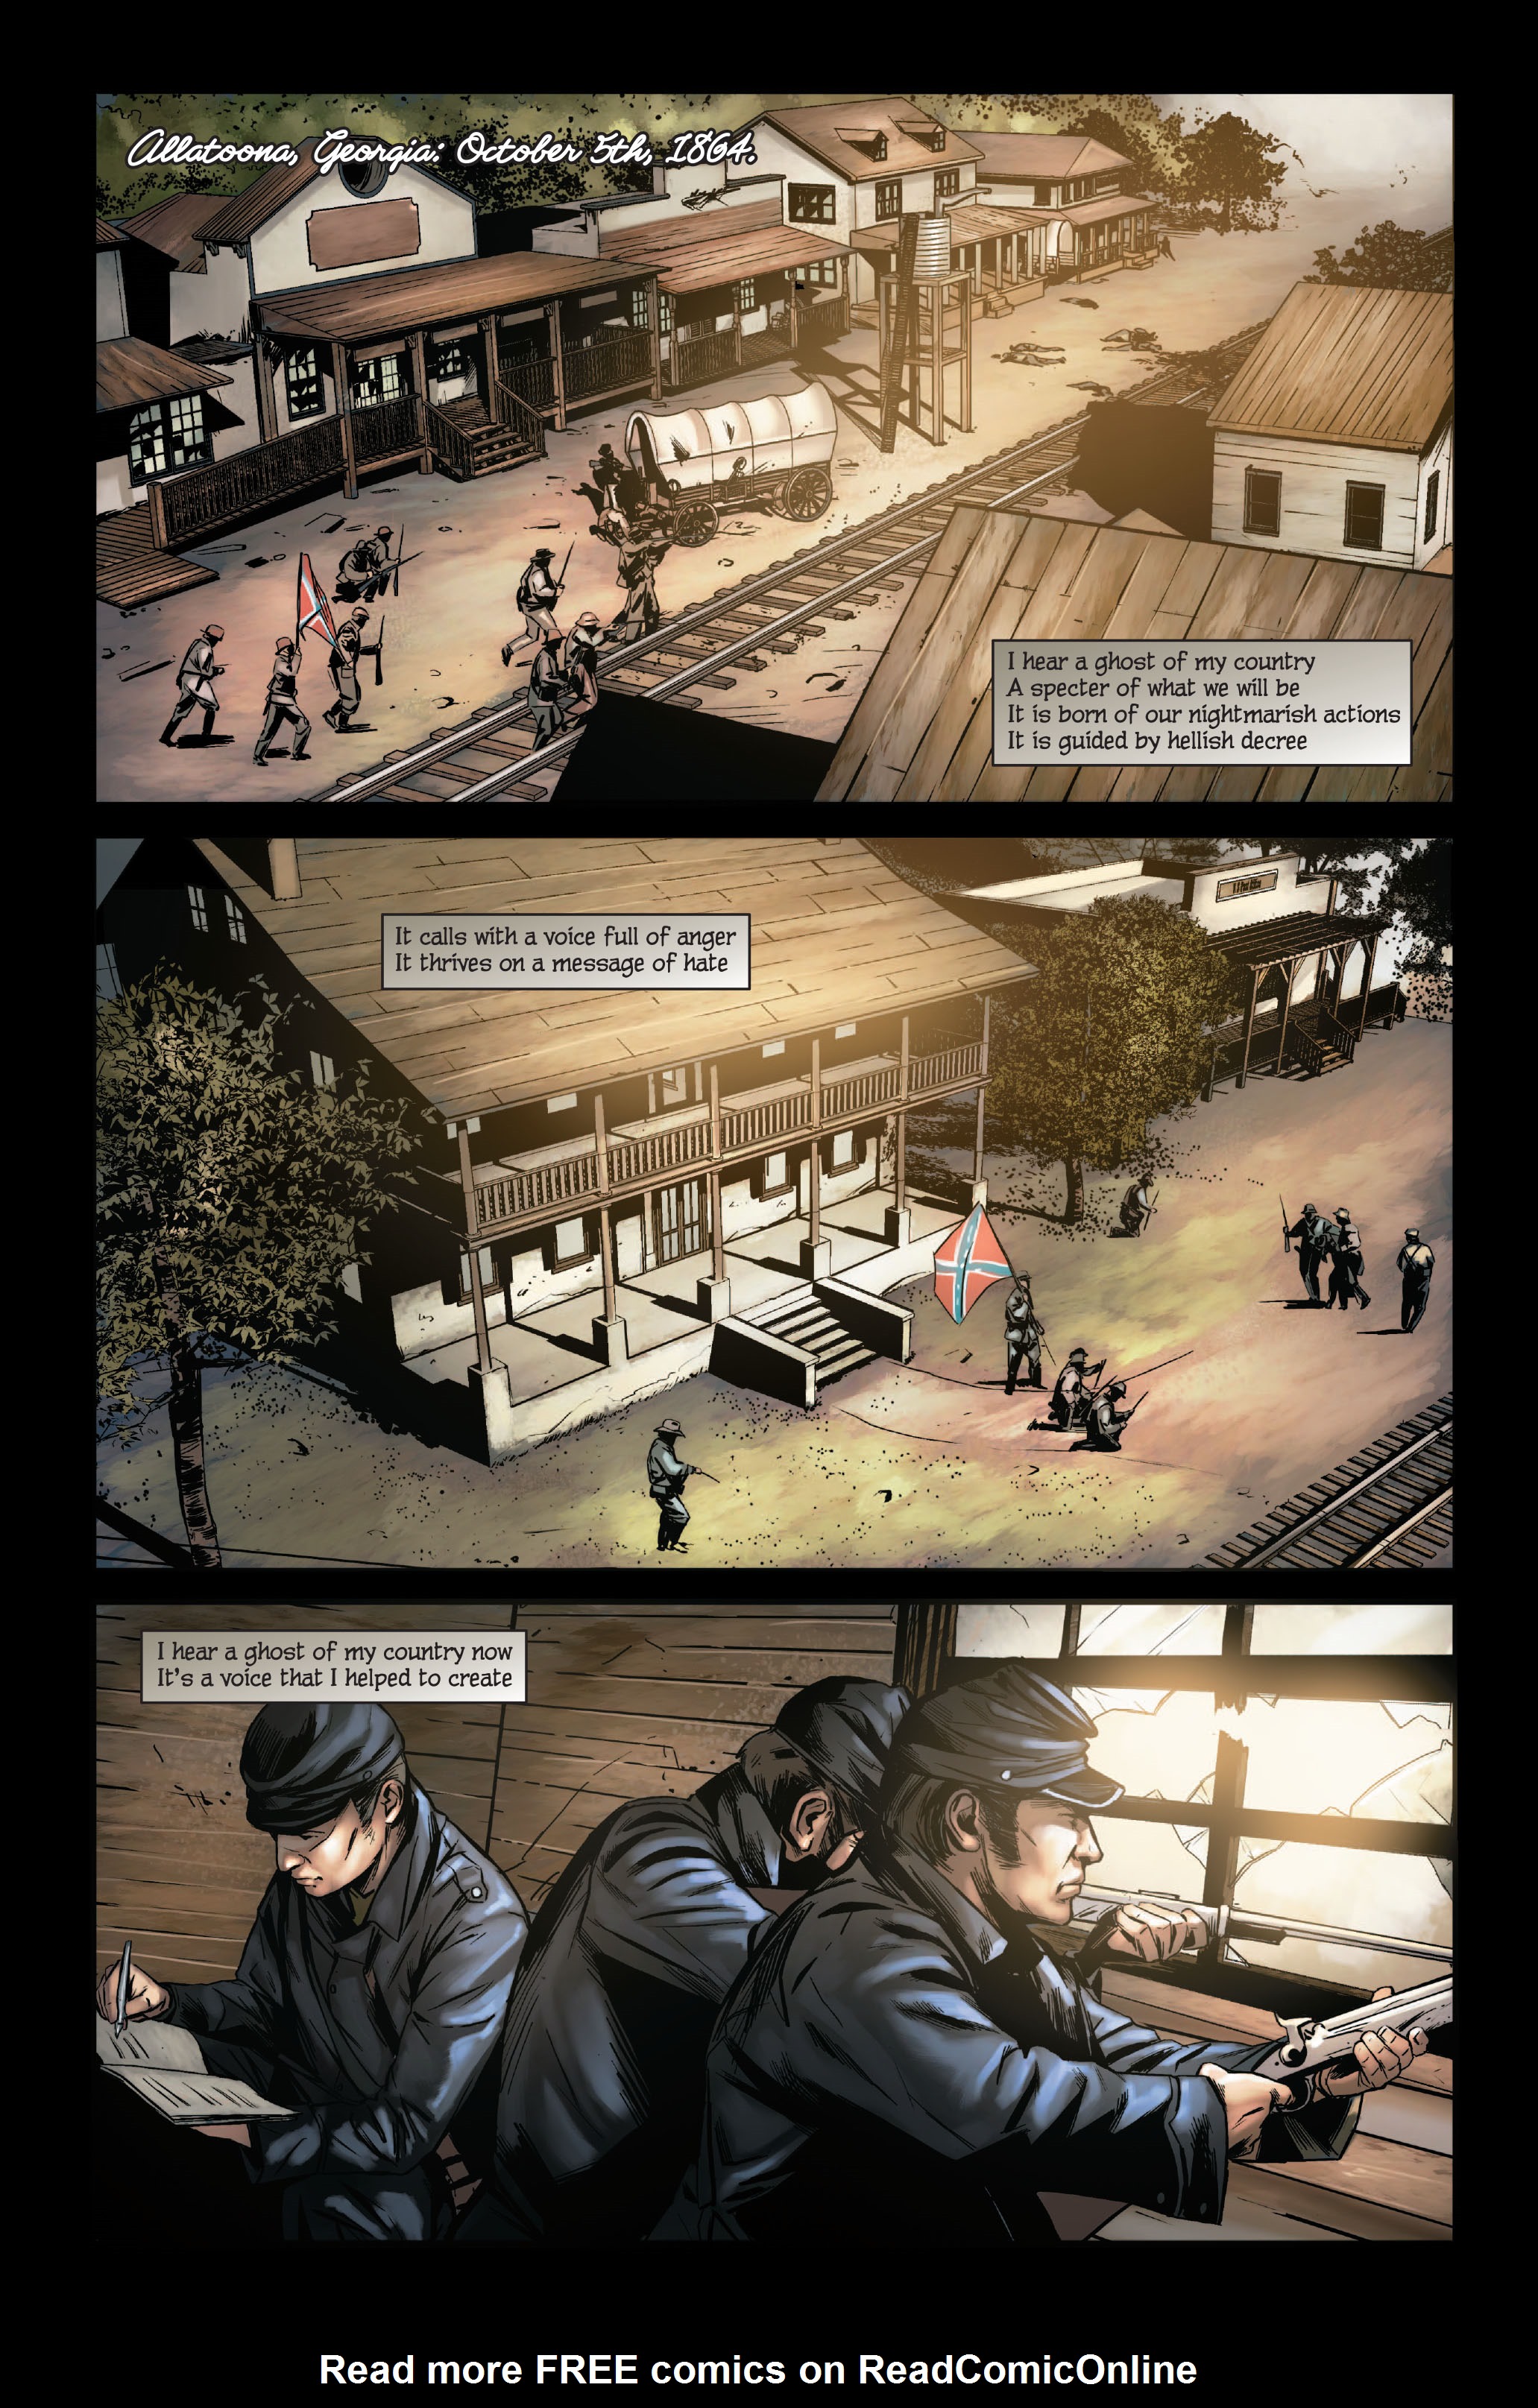 Captain America Theater of War: Ghosts of My Country Full Page 17